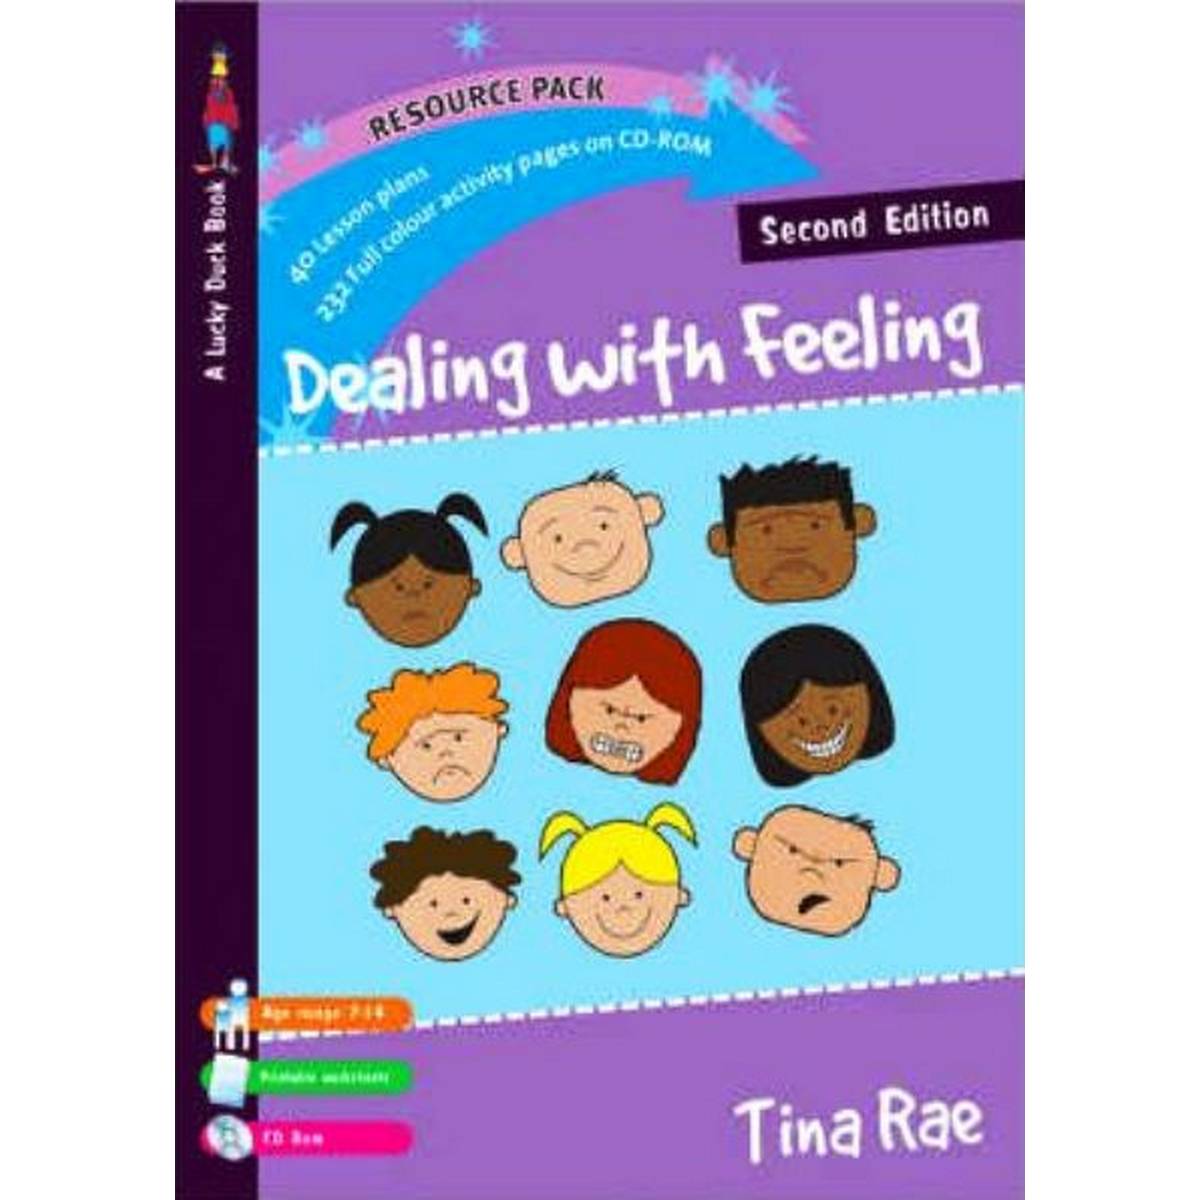 Dealing with Feeling (2nd Edition) by Tina Rae